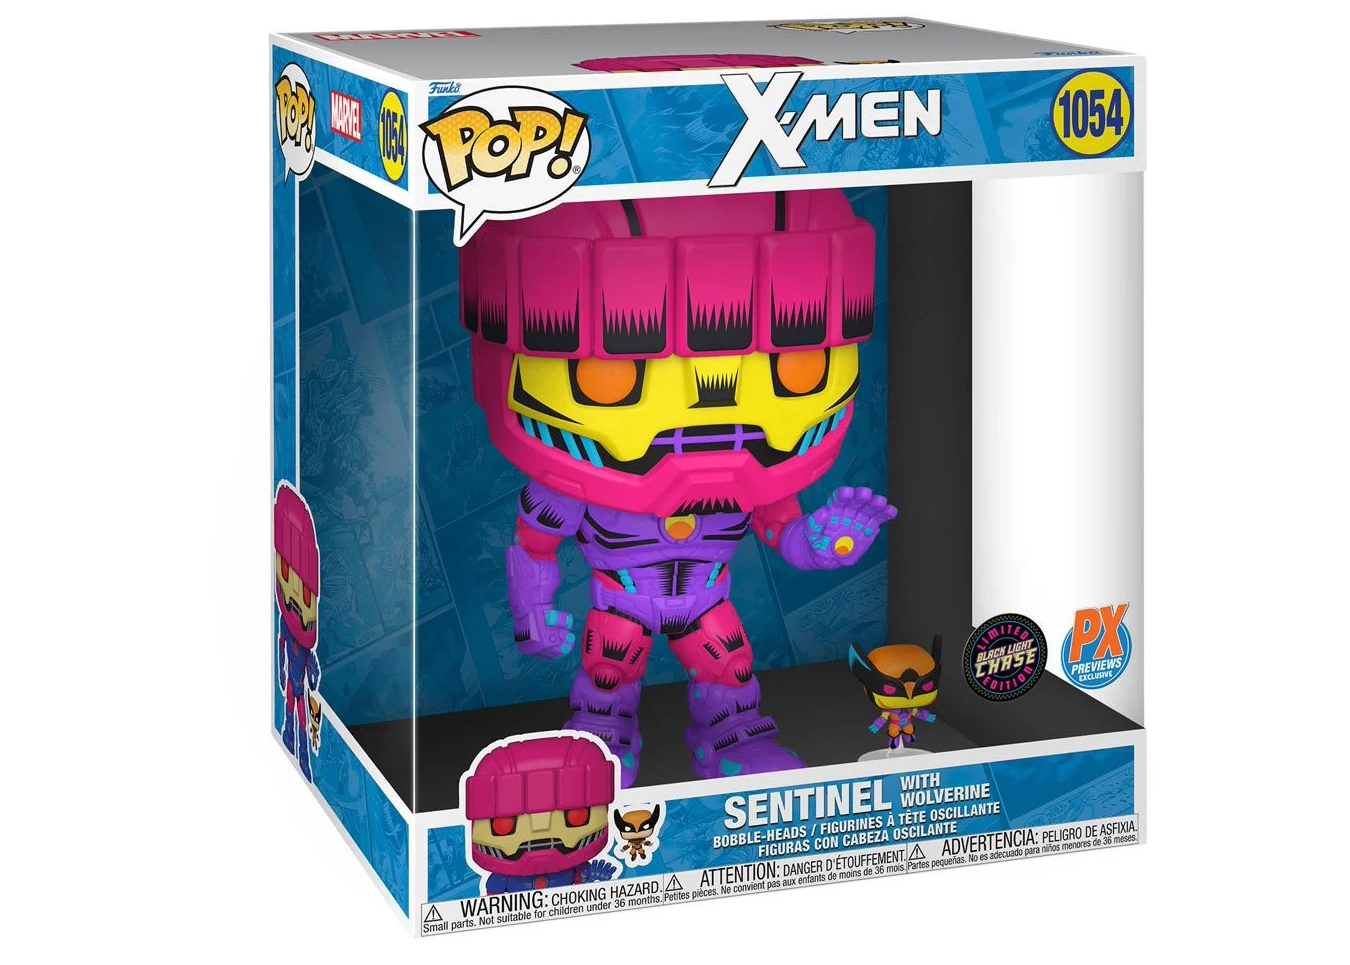 Funko Pop! Marvel X-Men Sentinel with Wolverine 10 Inch Black Light Chase  Edition PX Previews Exclusive Figure #1054